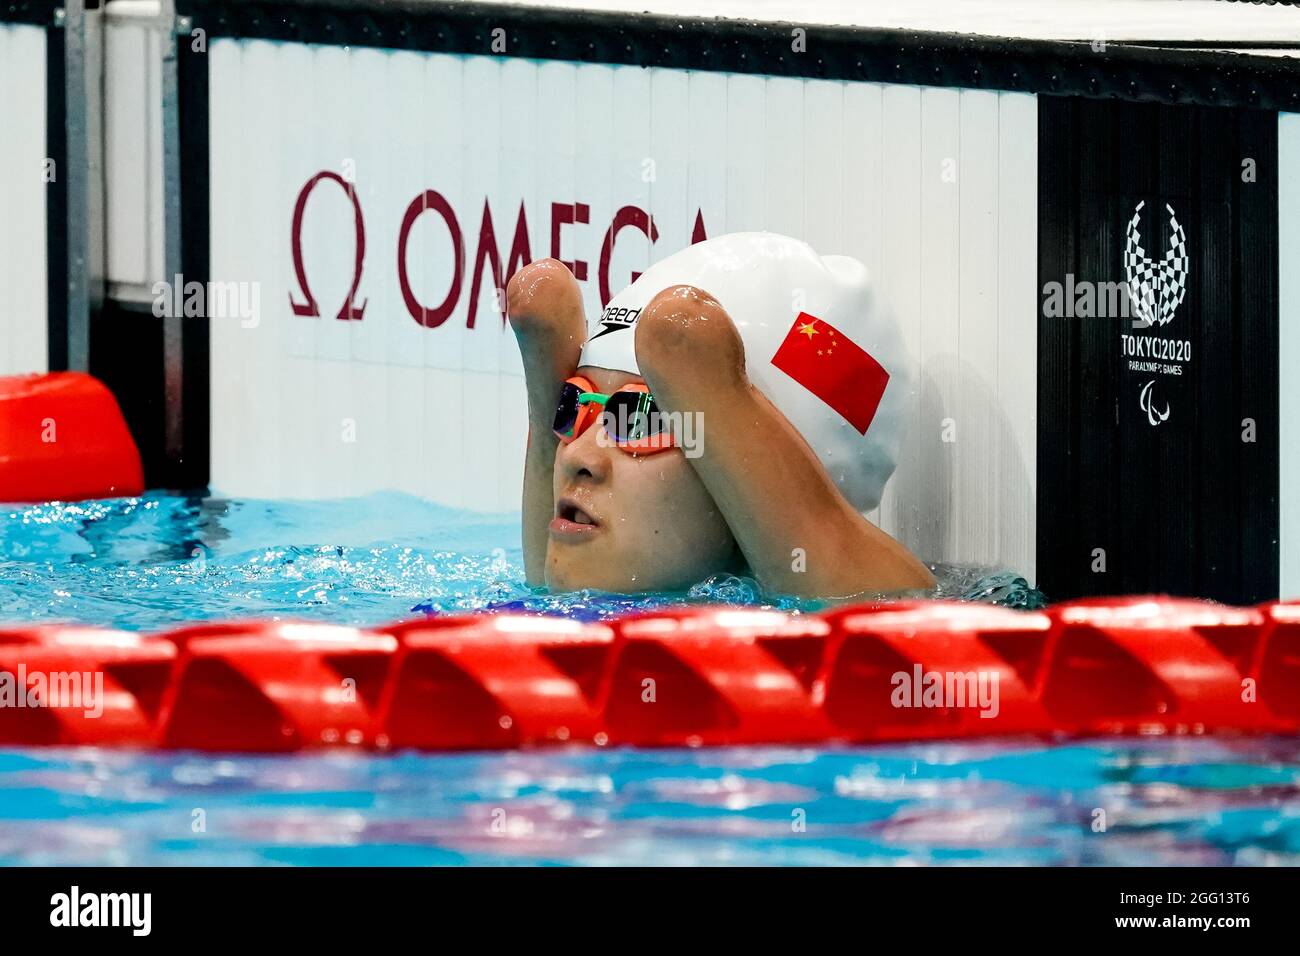 TOKYO, JAPAN - AUGUST 28: Daomin Liu of China after competing in the Women's 100m Breaststroke SB6 Heats during the Tokyo 2020 Paralympic Games at Tokyo Aquatics Centre on August 28, 2021 in Tokyo, Japan (Photo by Ilse Schaffers/Orange Pictures) NOCNSF Stock Photo